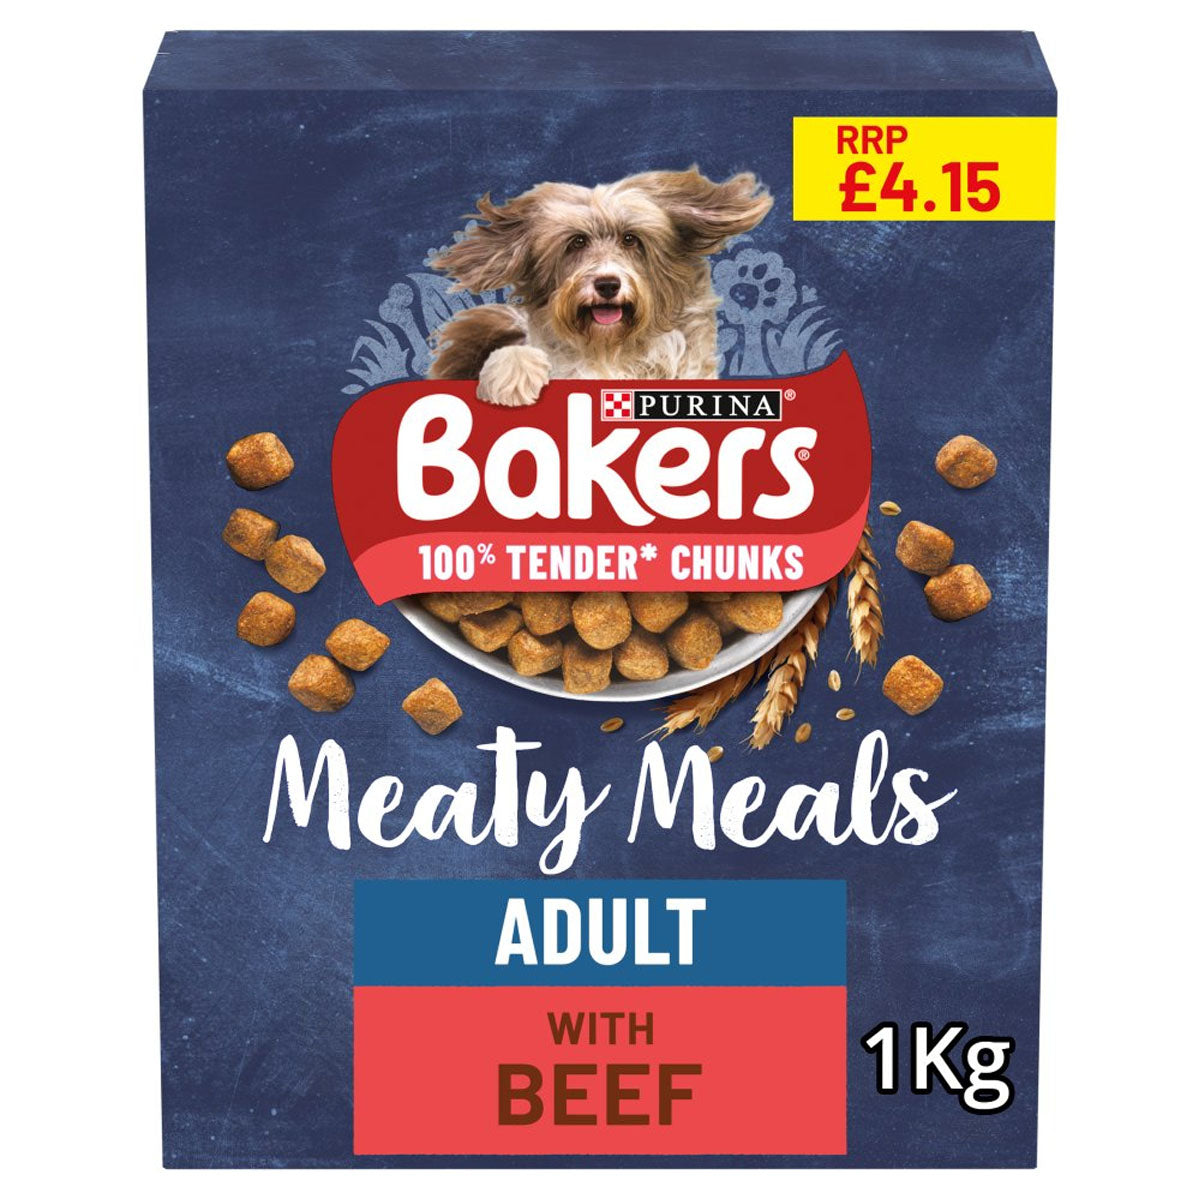 Bakers - Meaty Meals Adult Tender Chunks with Tasty Beef - 1kg - Continental Food Store